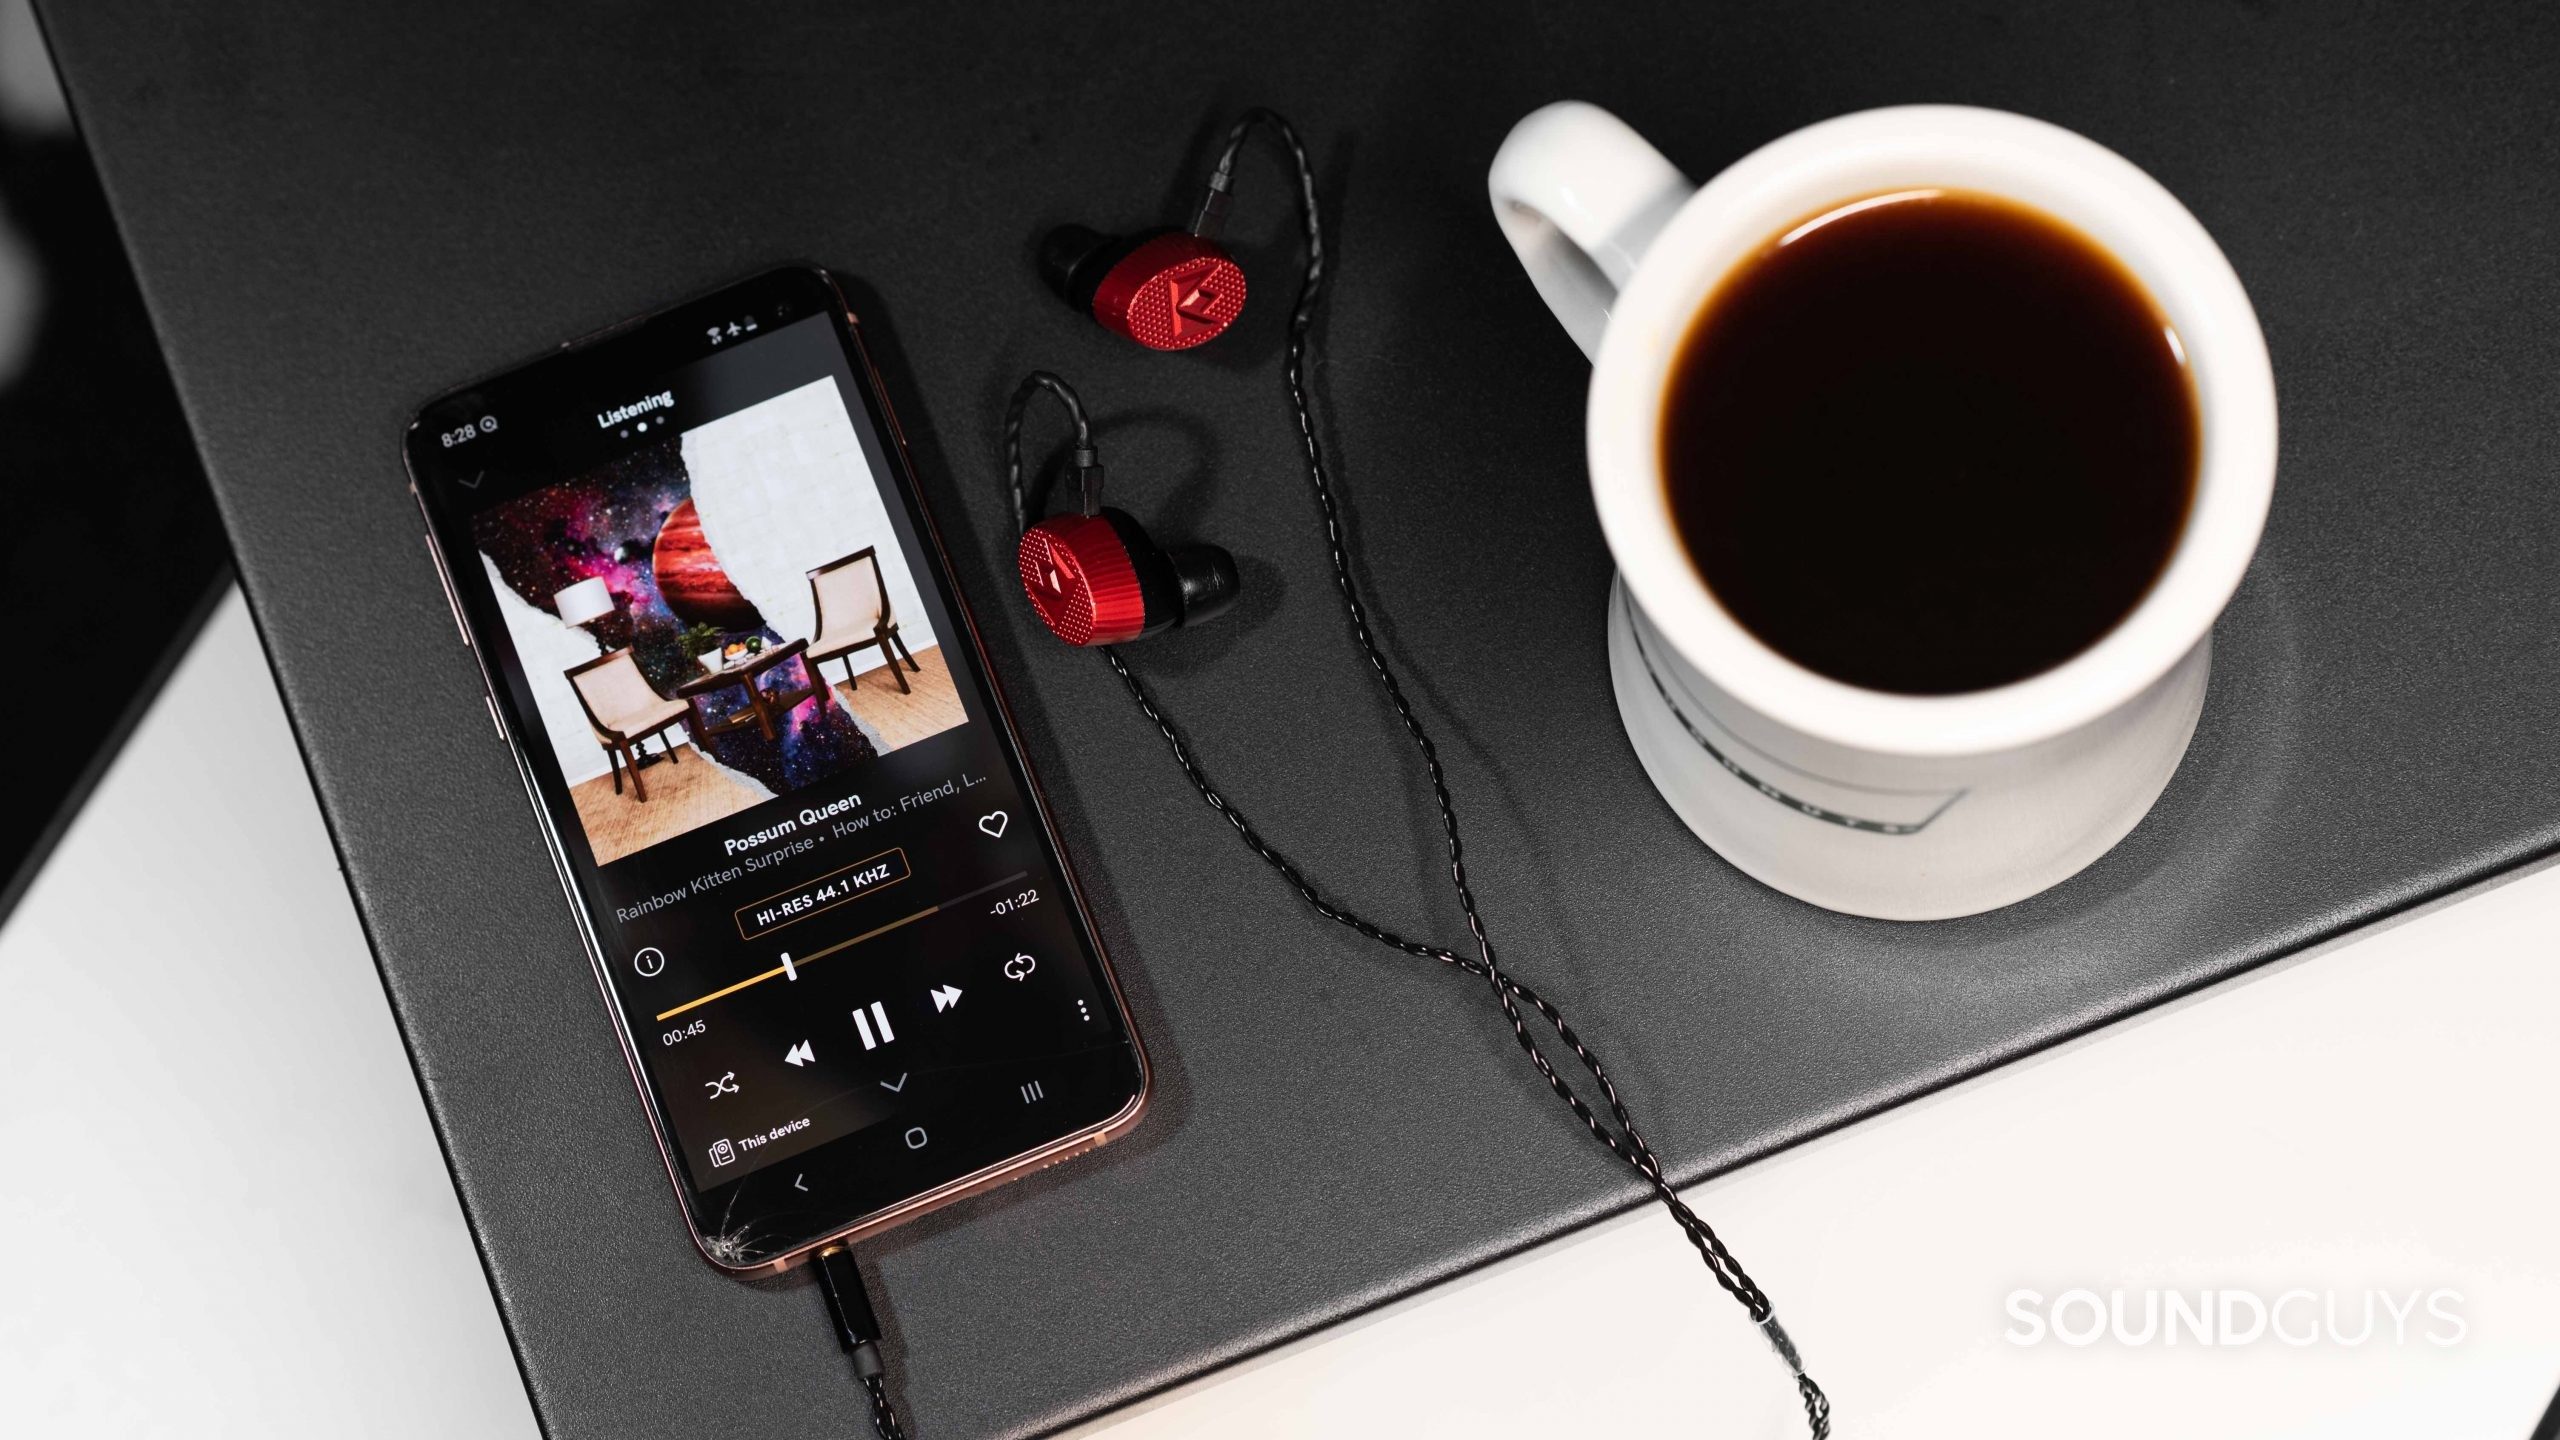 The Qobuz music streaming service app's Listening tab open on a Samsung Galaxy S10e smartphone next to a pair of Massdrop x Noble Kaiser 10 IEMs and a cup of coffee.